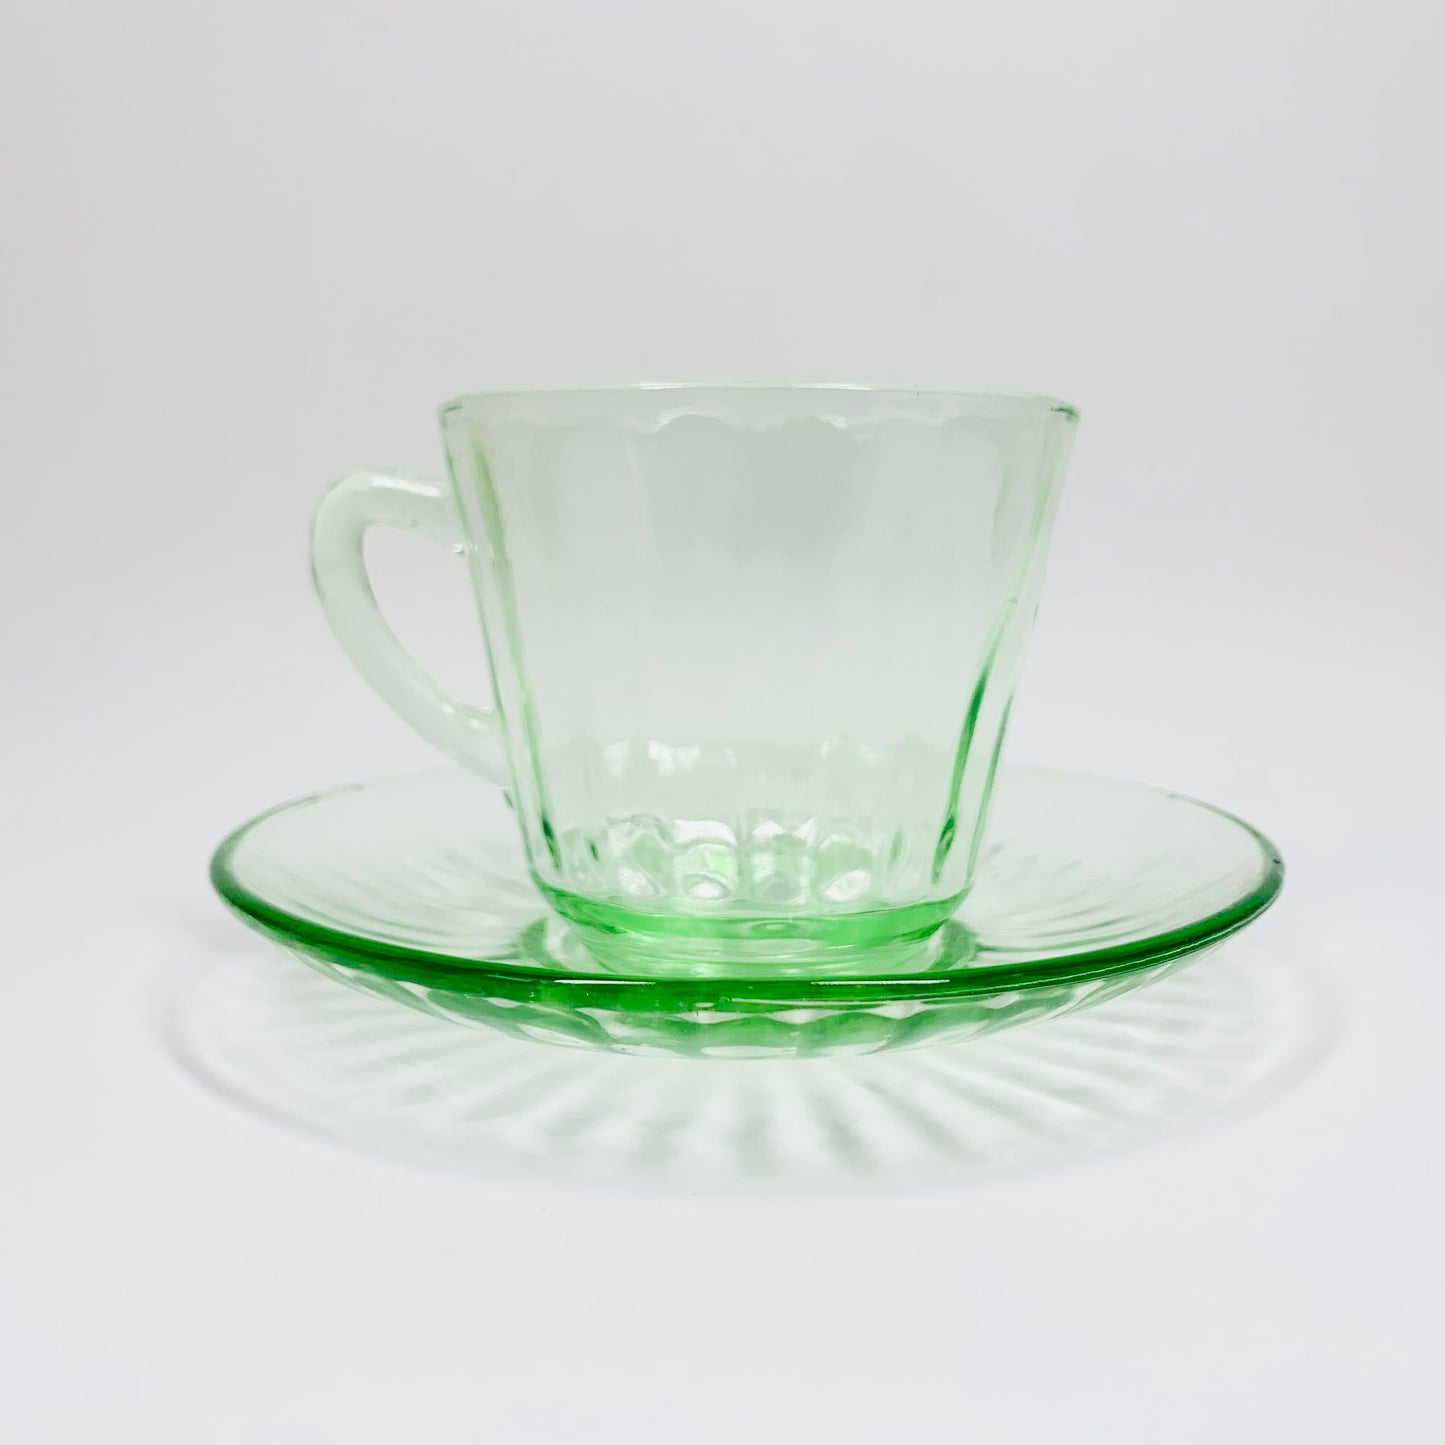 Extremely rare antique Art Deco green glass tea cup and matching saucer